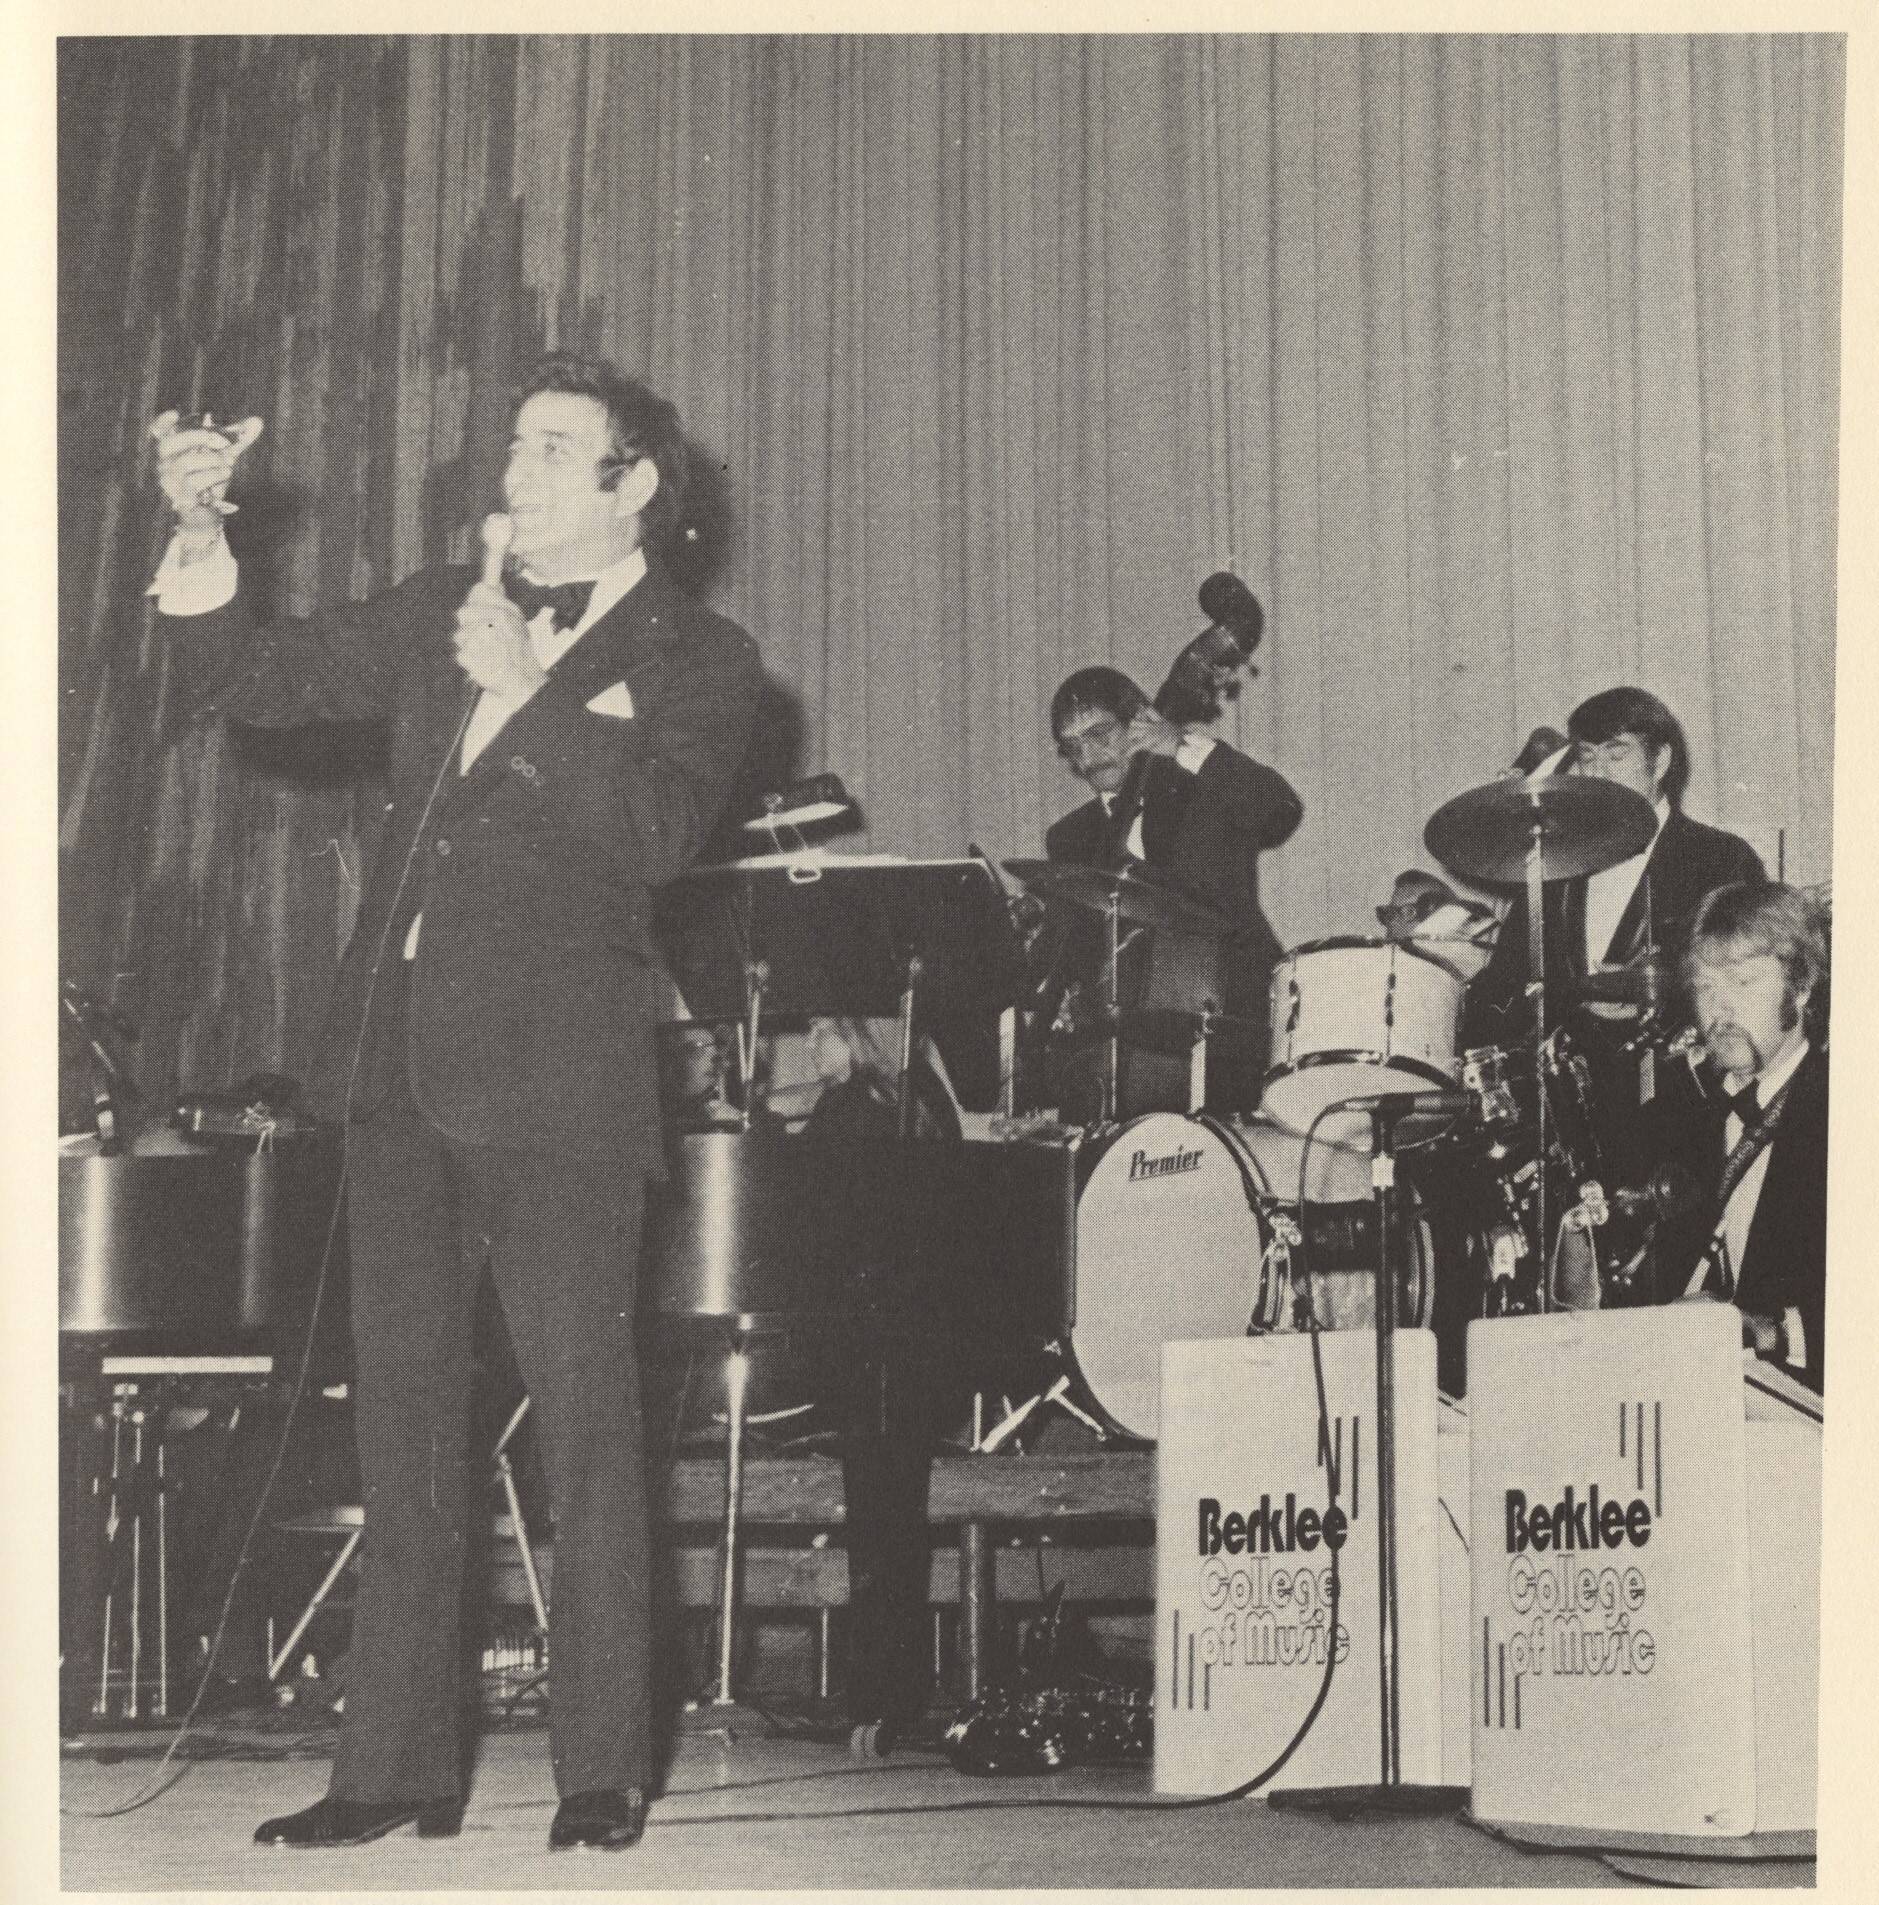 Tony Bennett performs with the Berklee Jazz Orchestra, pictured in a Berklee College of Music catalog from 1978-1979. (Courtesy Berklee Archives)